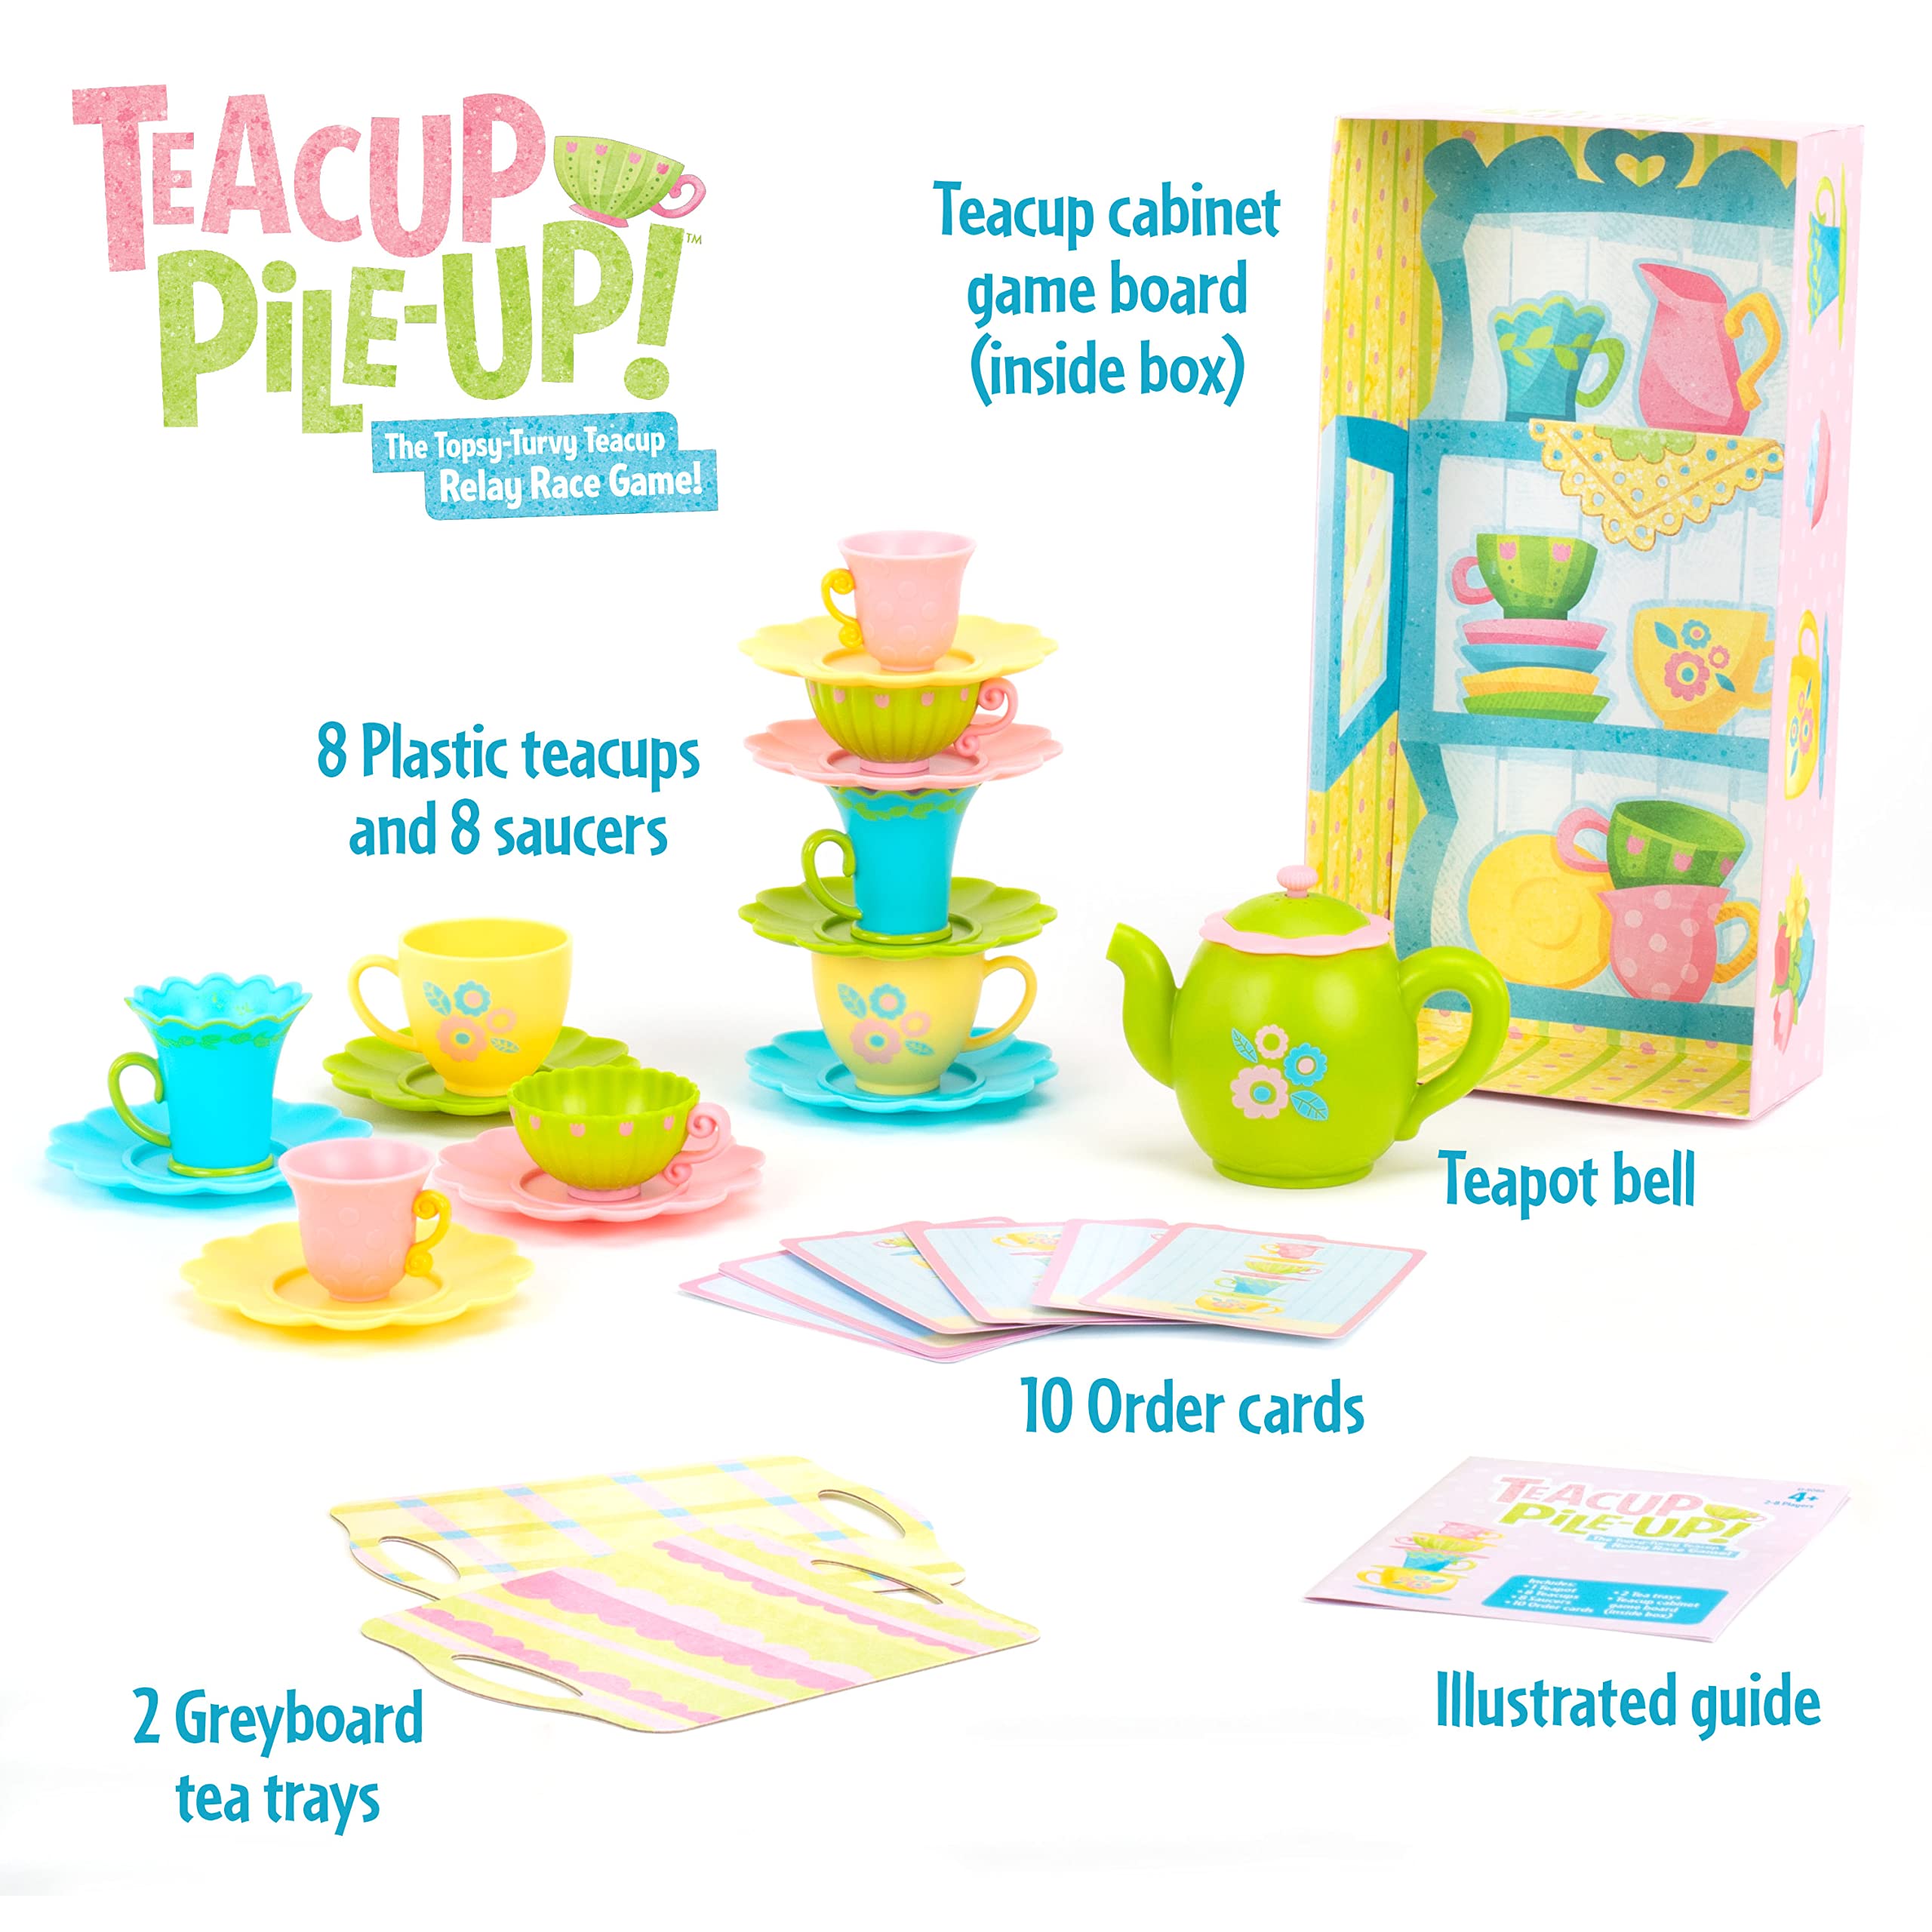 Educational Insights Teacup Pile-Up! Relay Game, Preschool Board Game, Gift for Kids Ages 4+